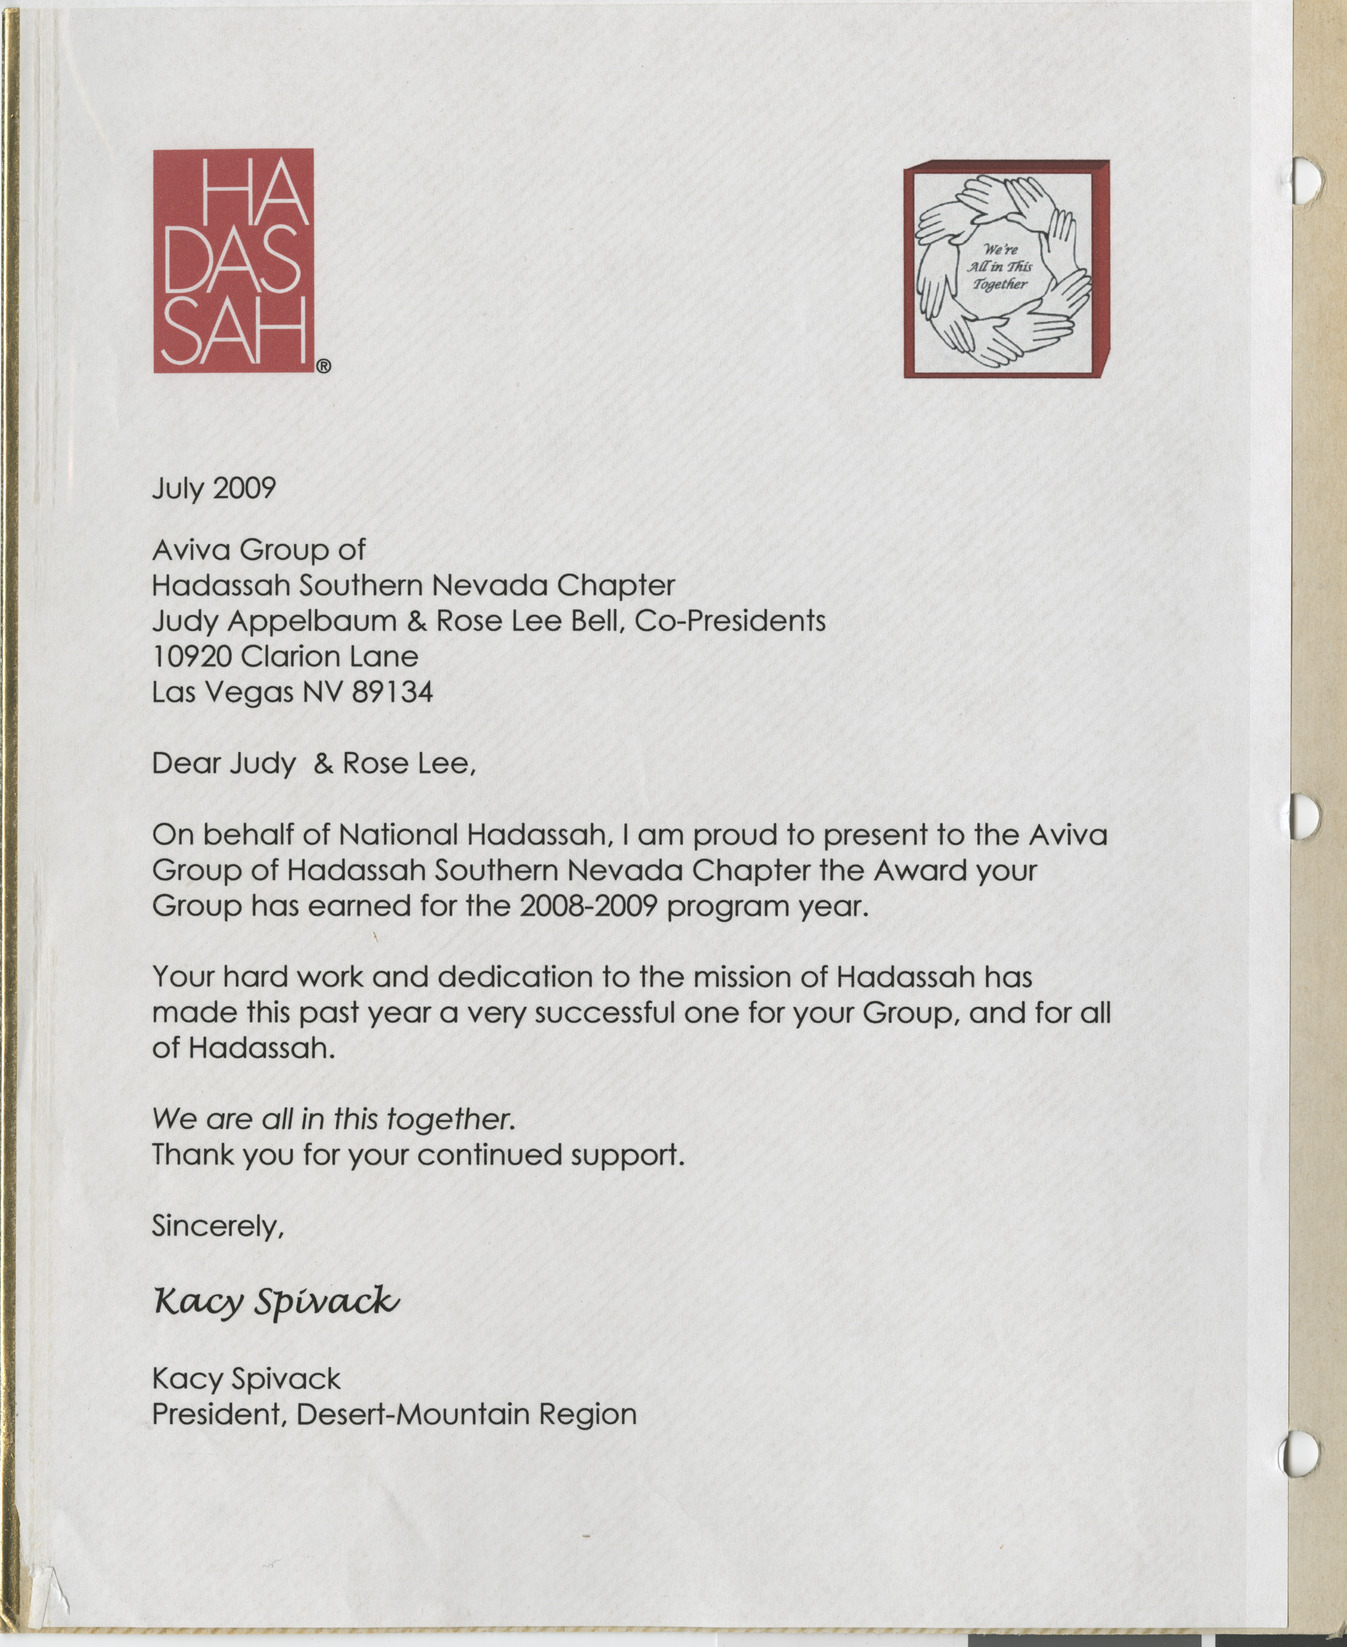 Letter from Kacy Spivak to Judy and Rose Lee, July 2009